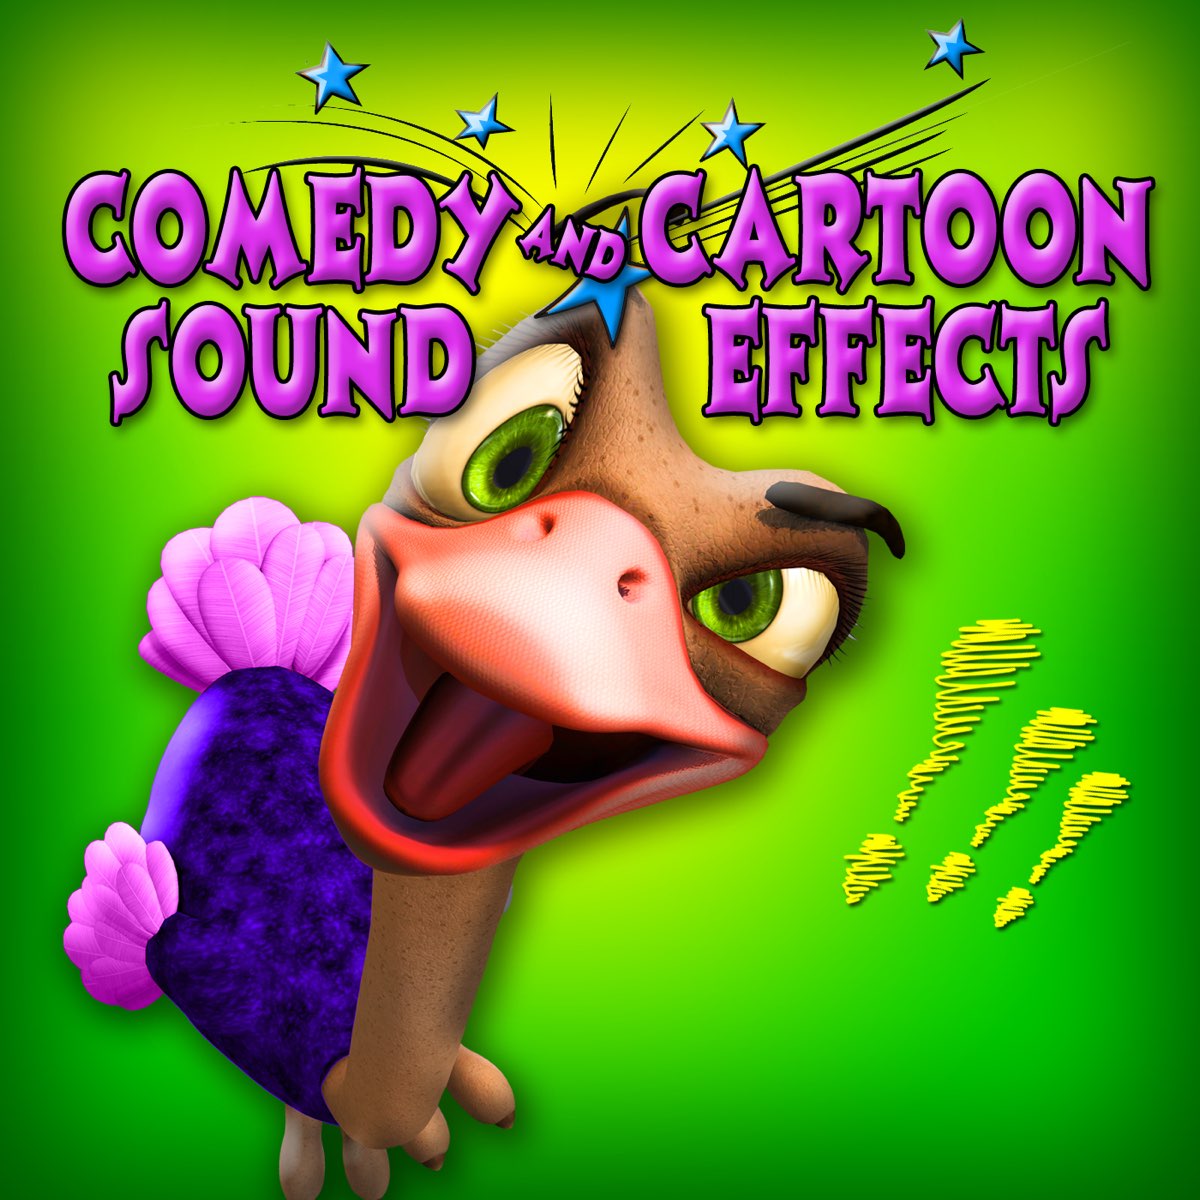 Comedy and Cartoon Sound Effects by Sound FX on Apple Music